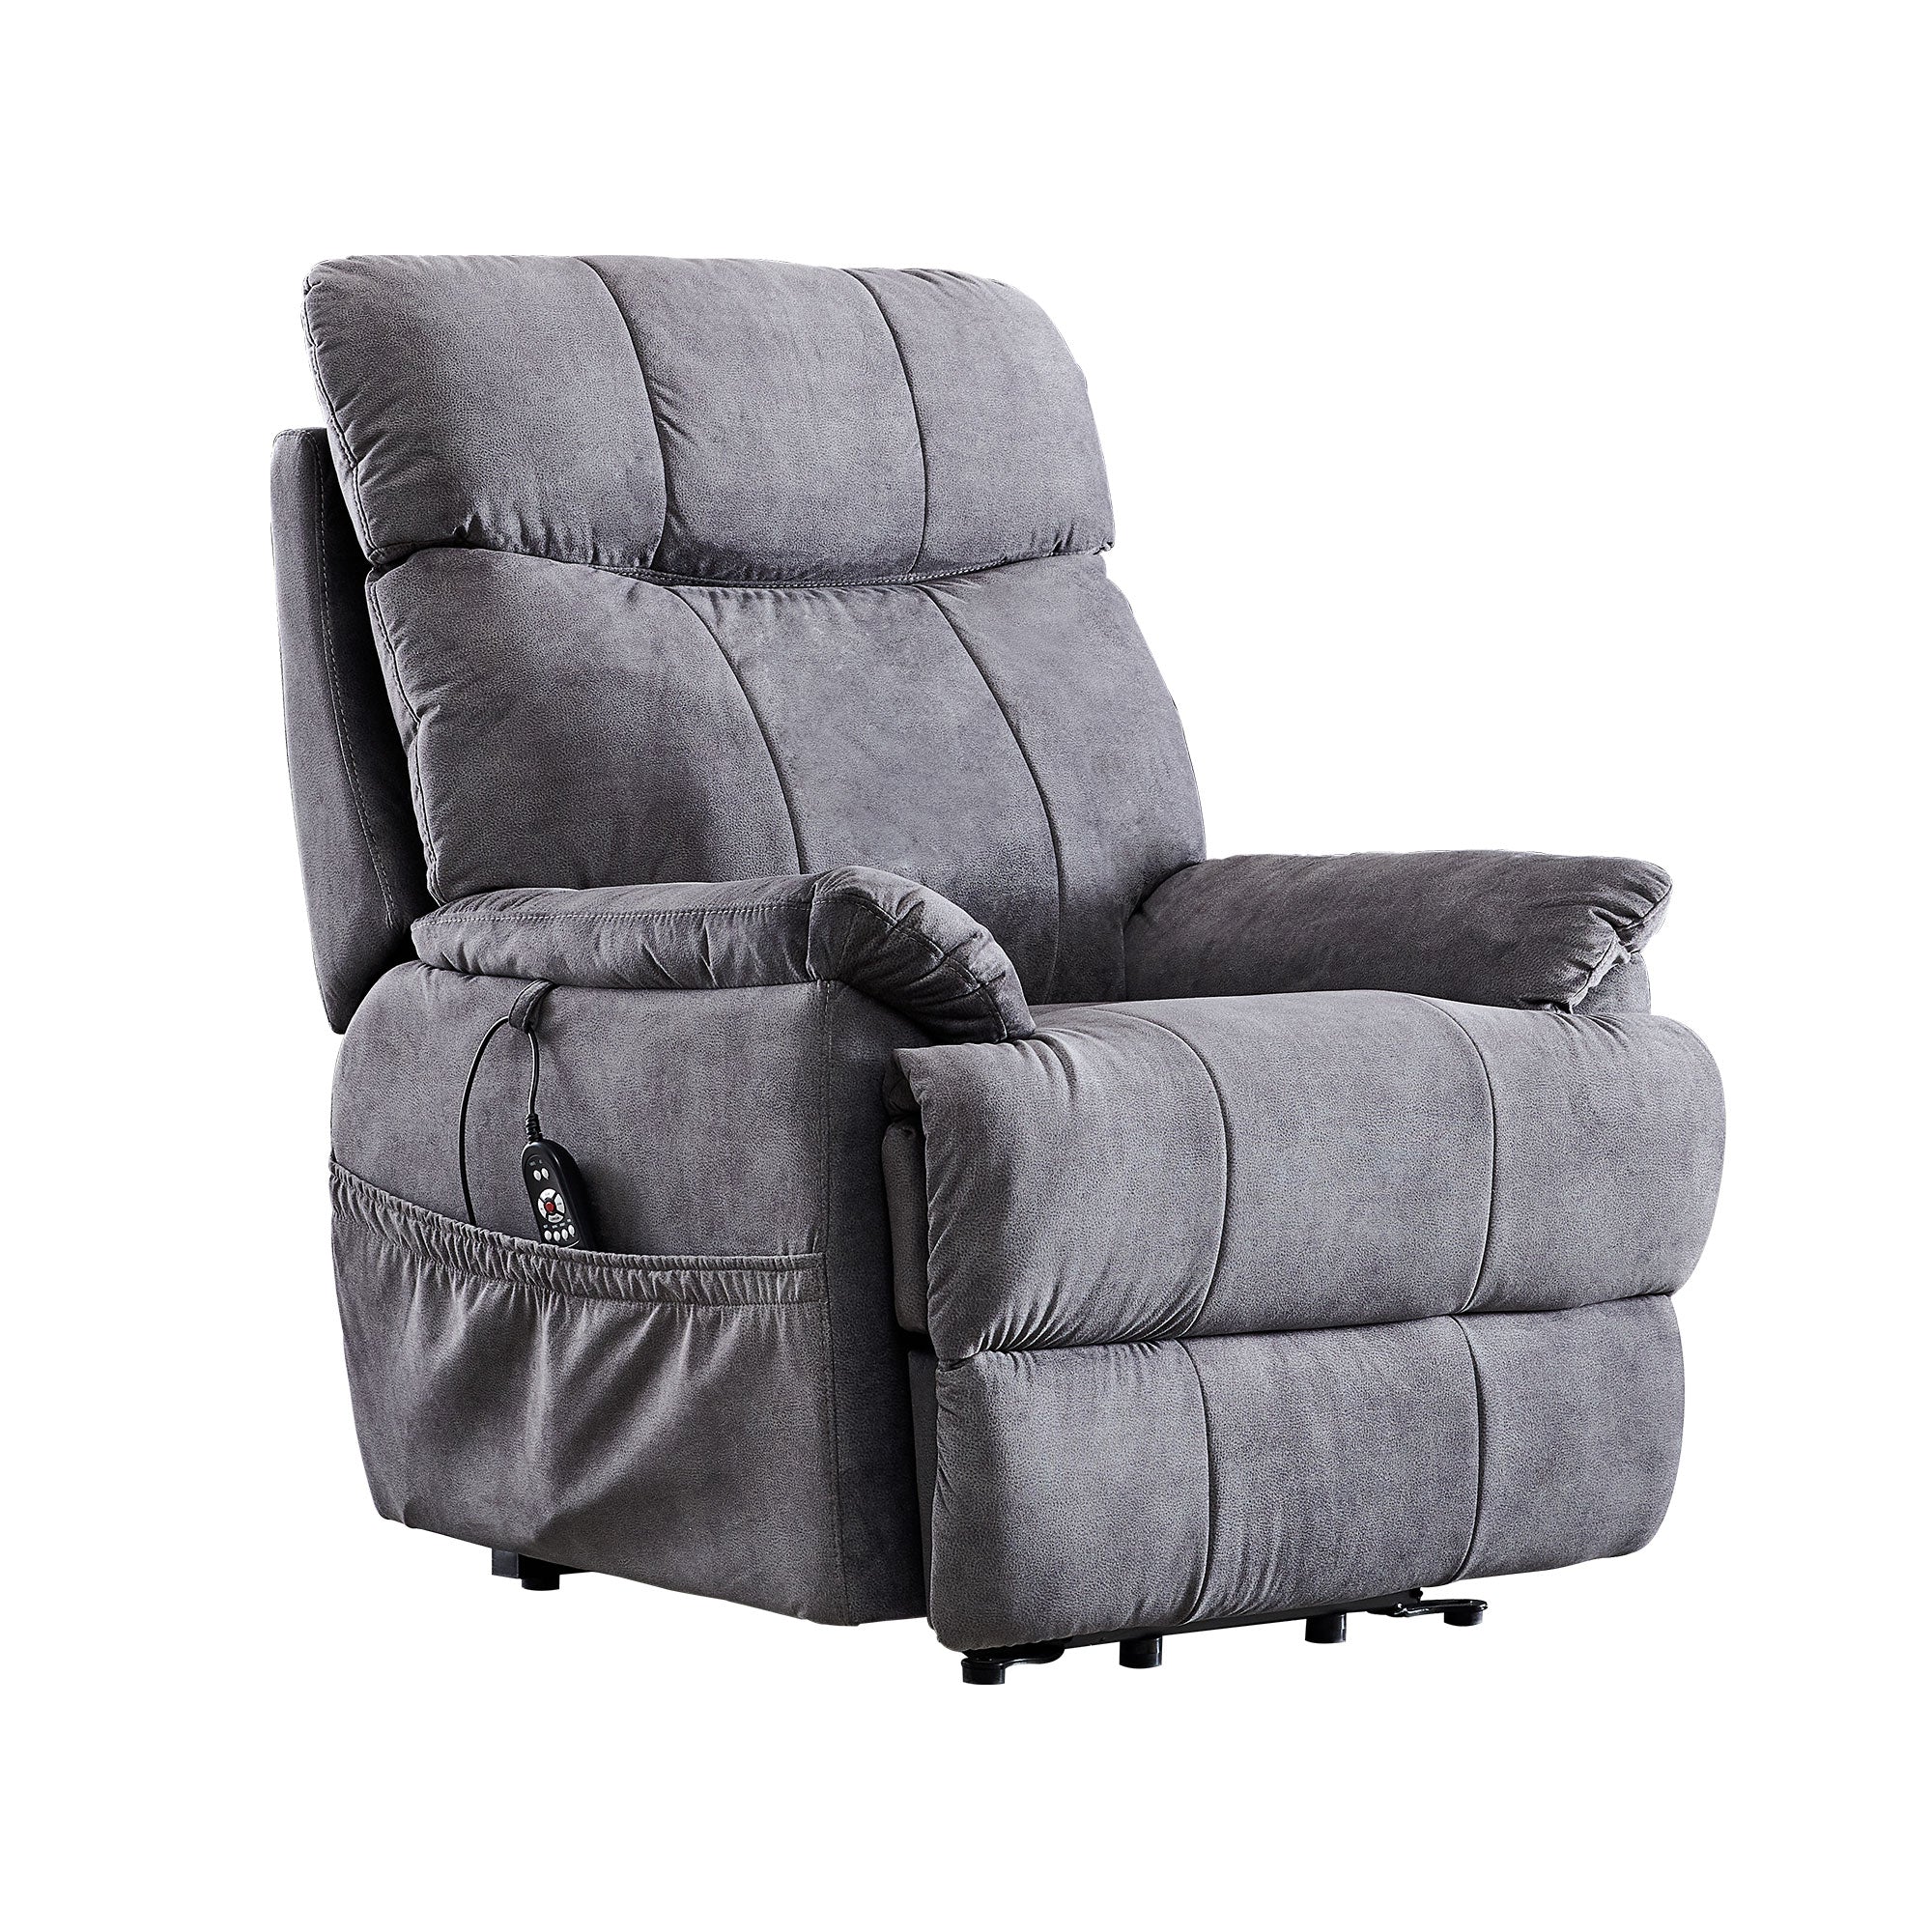 8 Points Massage and Heat Large Power Lift Recliner Chair with Remote Control-Boyel Living